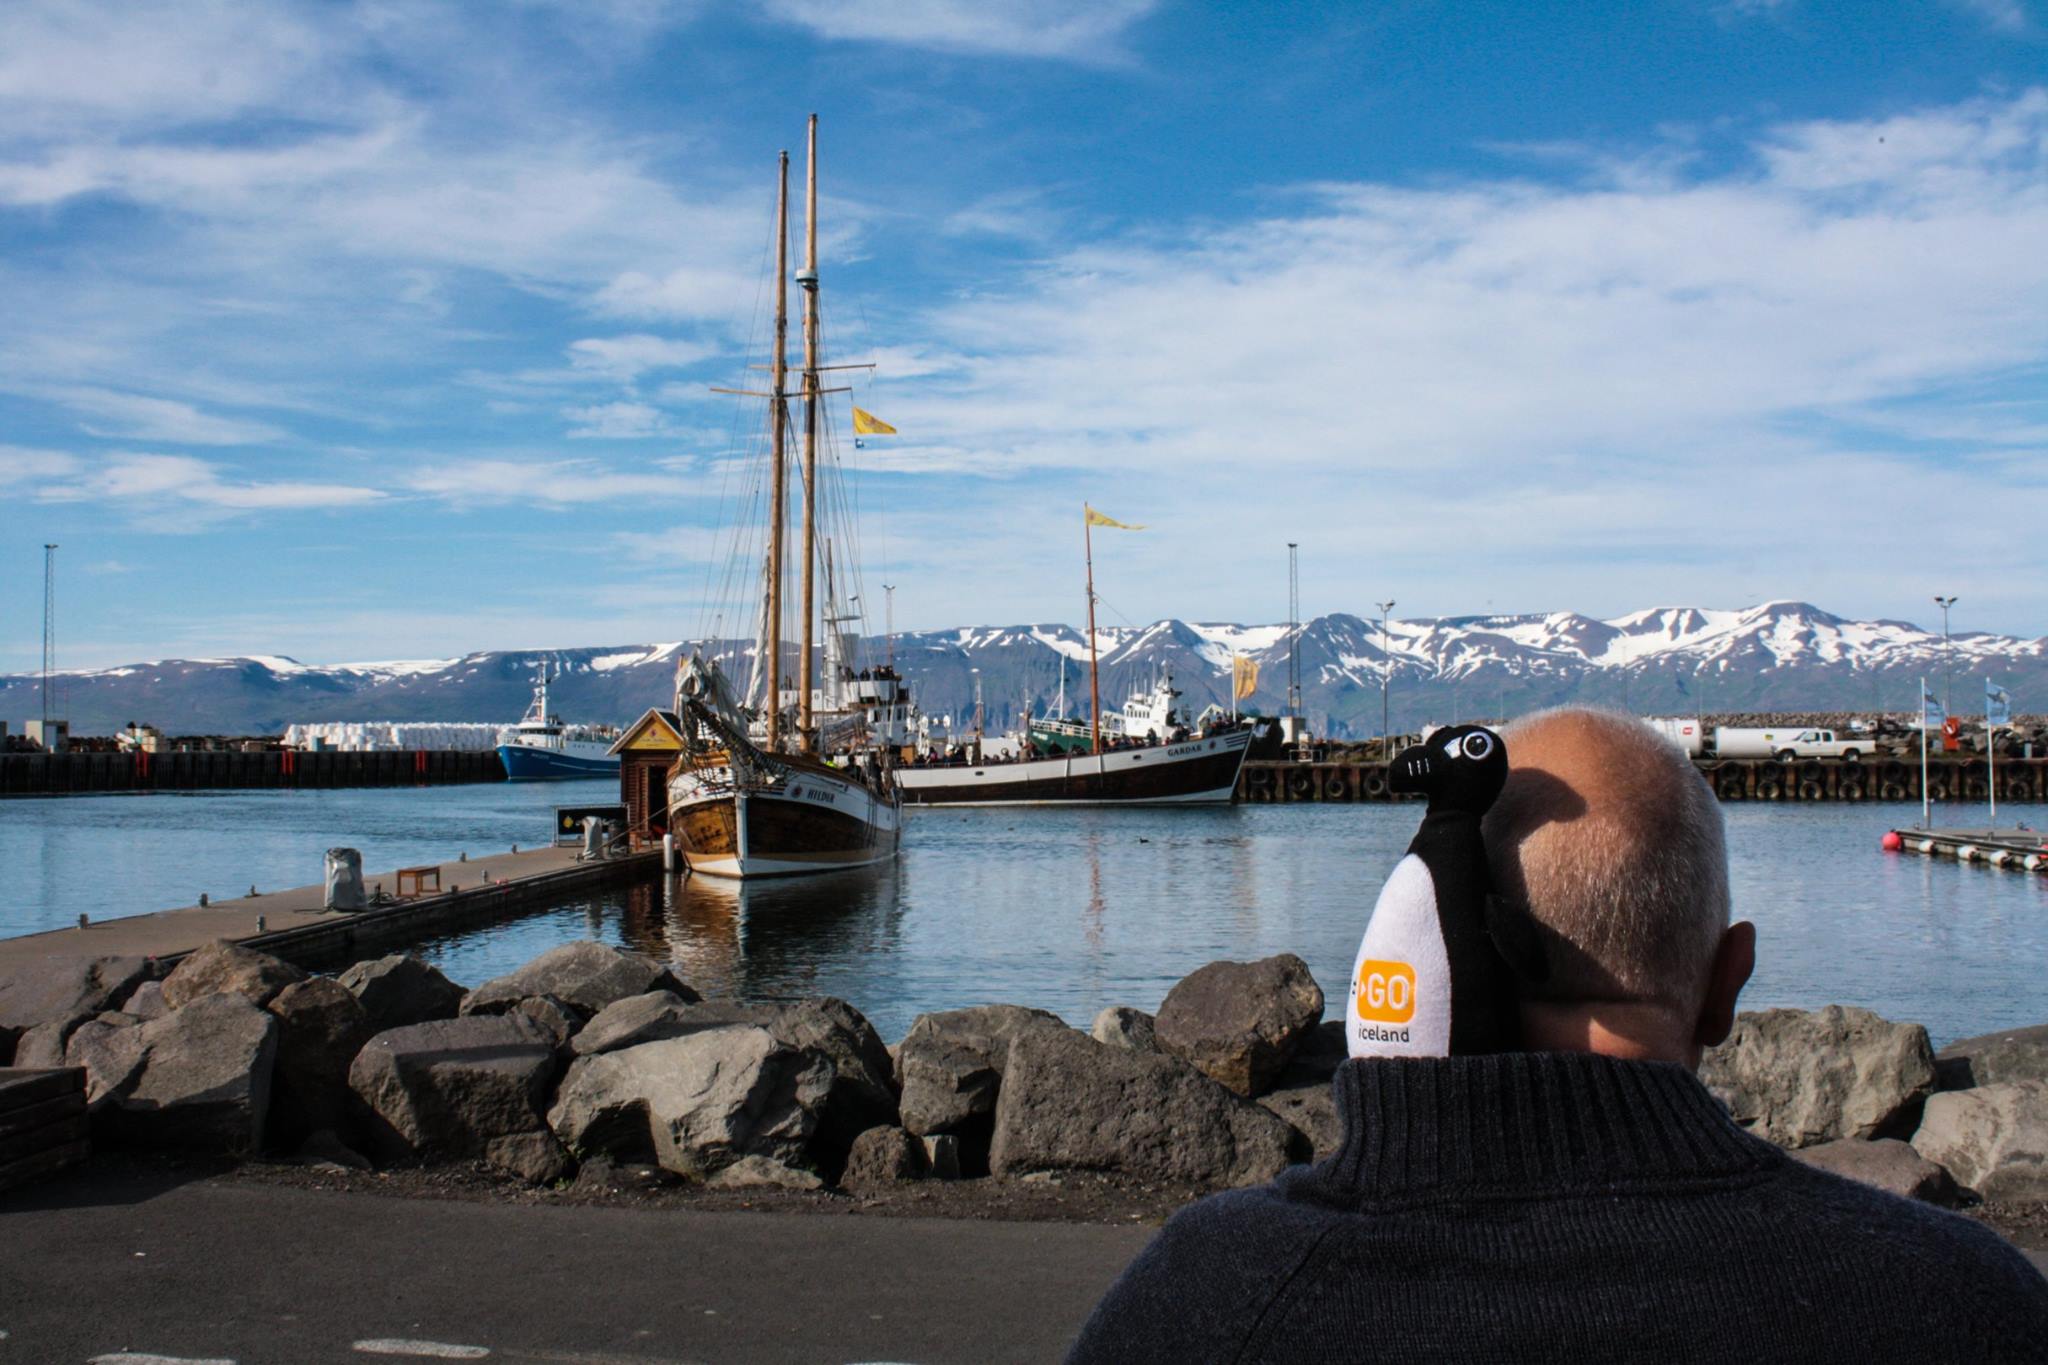 Auk GO Iceland plush in a man's sweater looking out at Reykjavik harbor